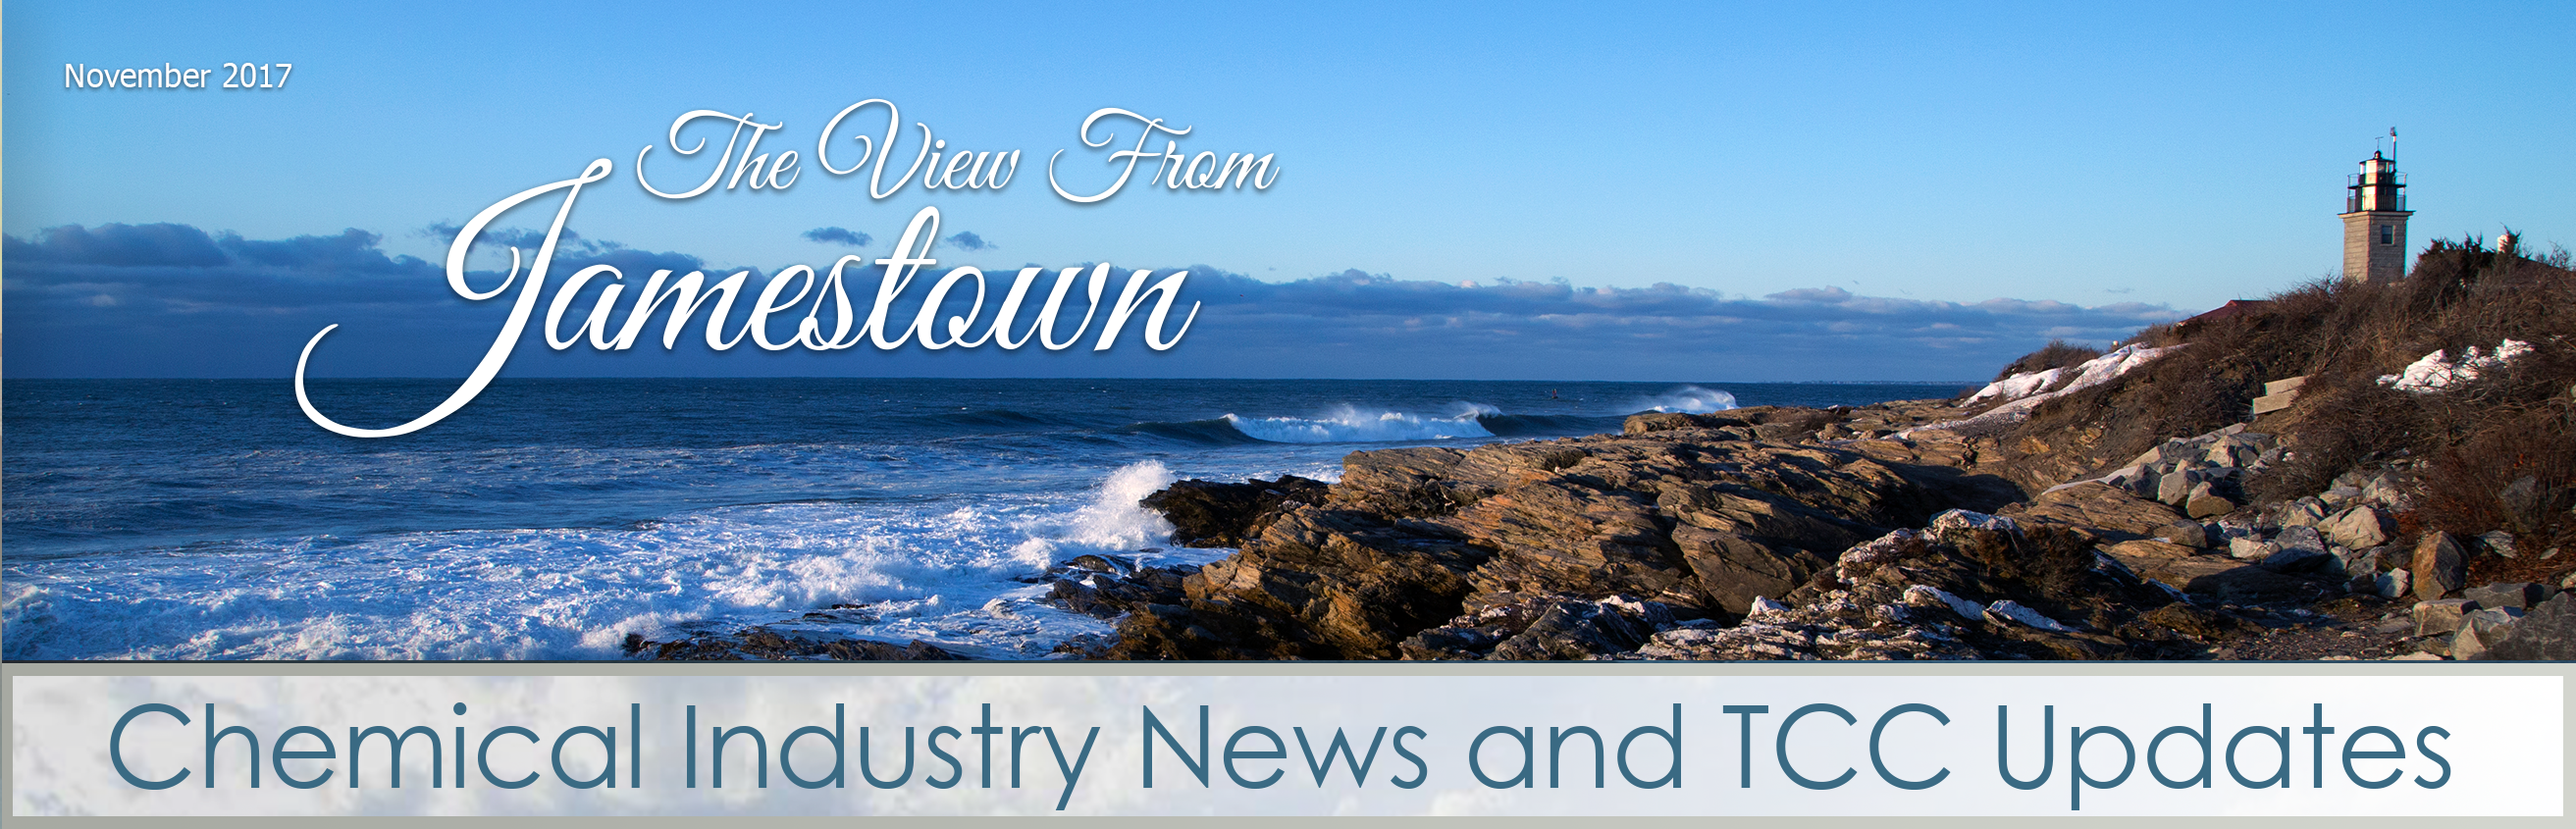 November 2017 The View From Jamestown - The Chemical Company | Chemical Distributor